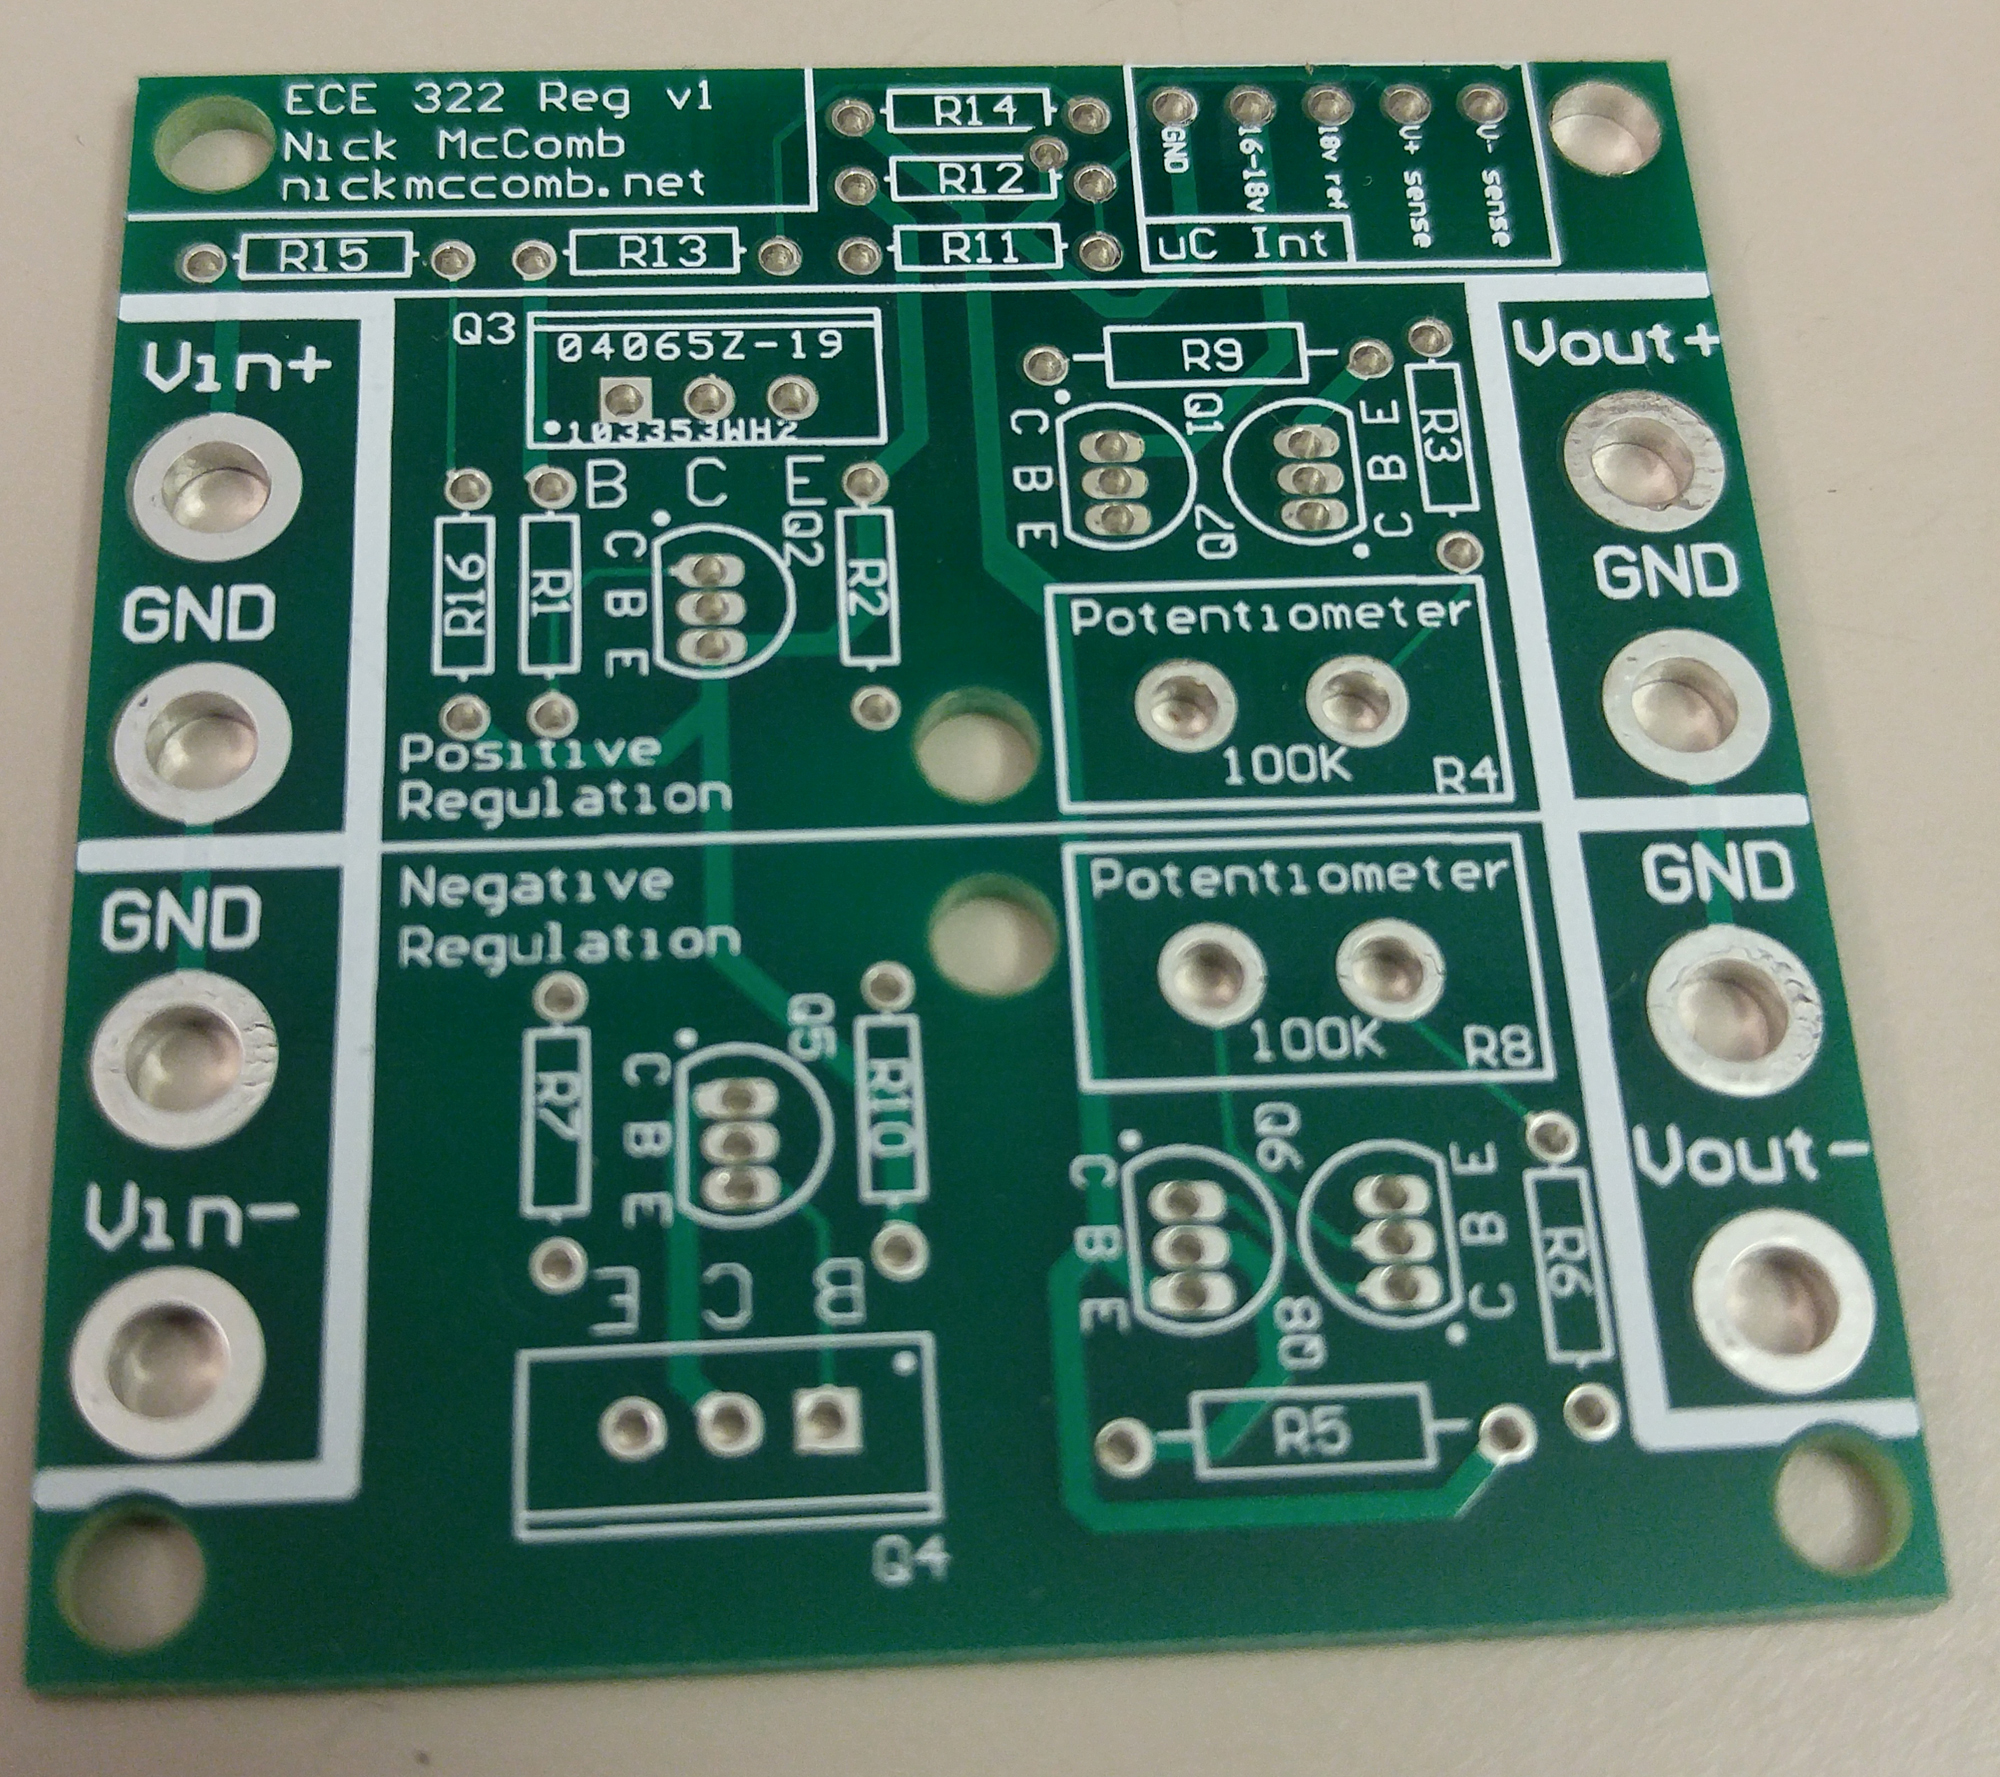 A Voltage Regulator PCB, the "core" of the project.